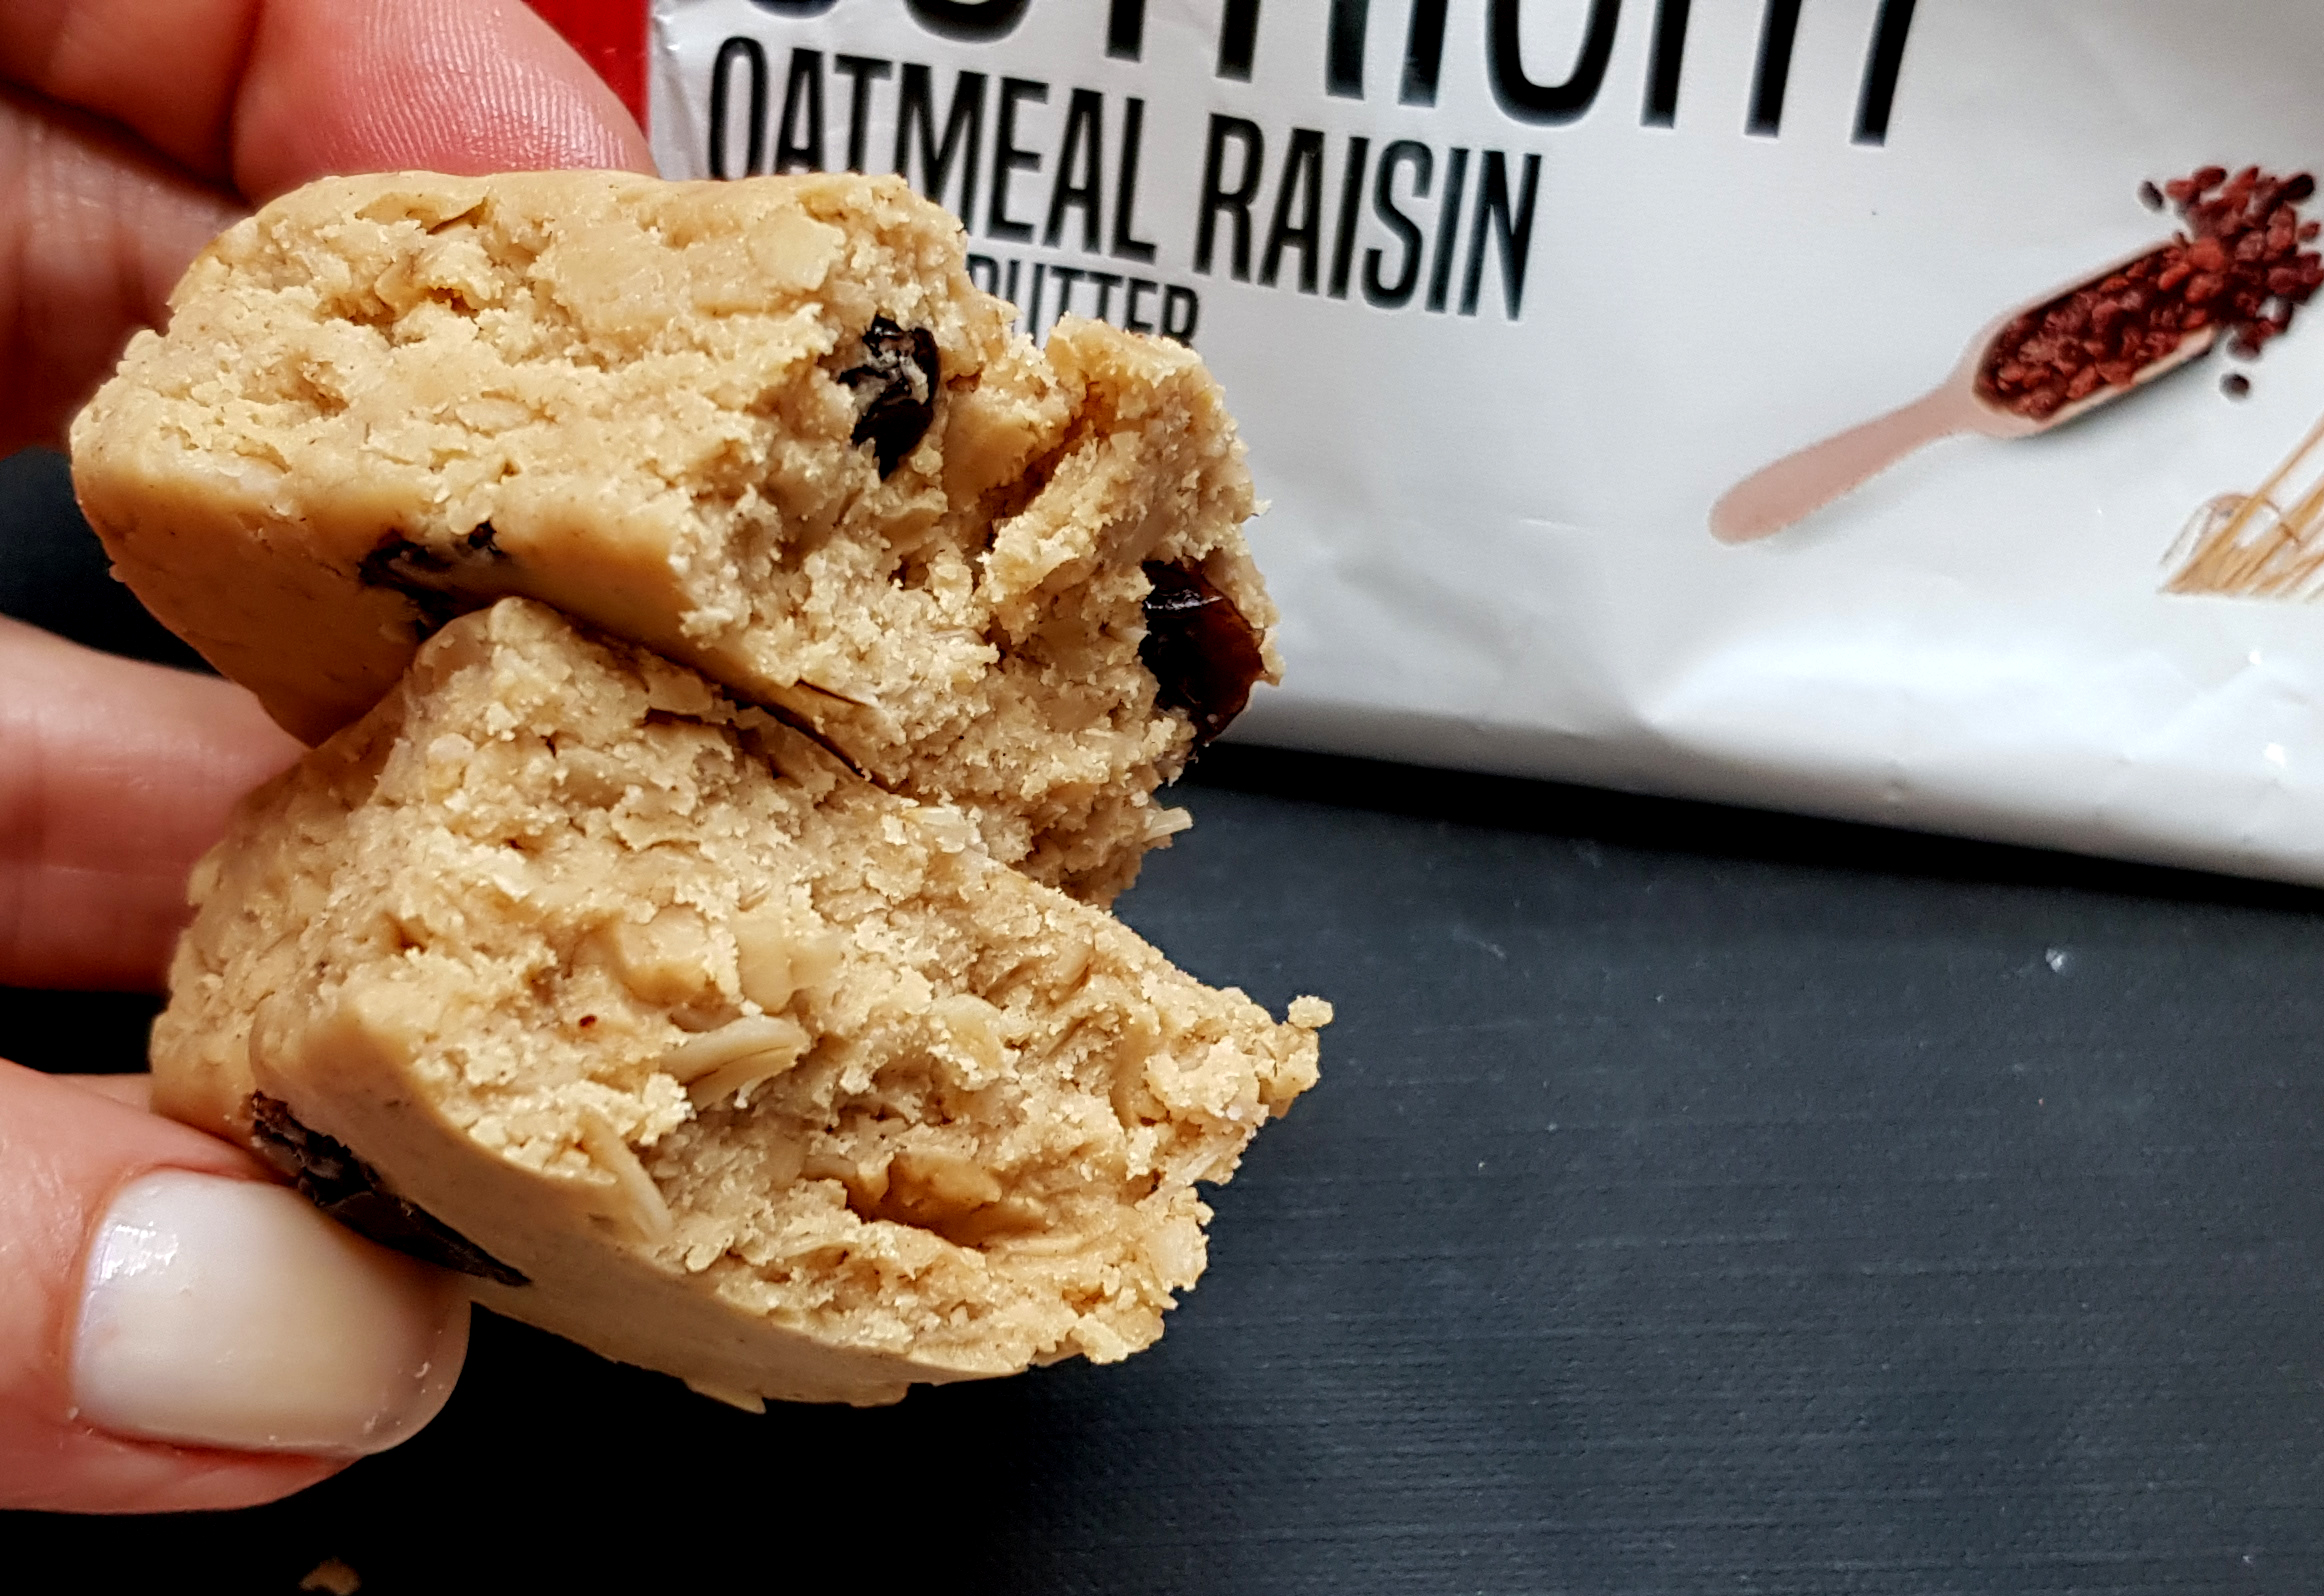 Outright Oatmeal Raisin Peanut Butter review